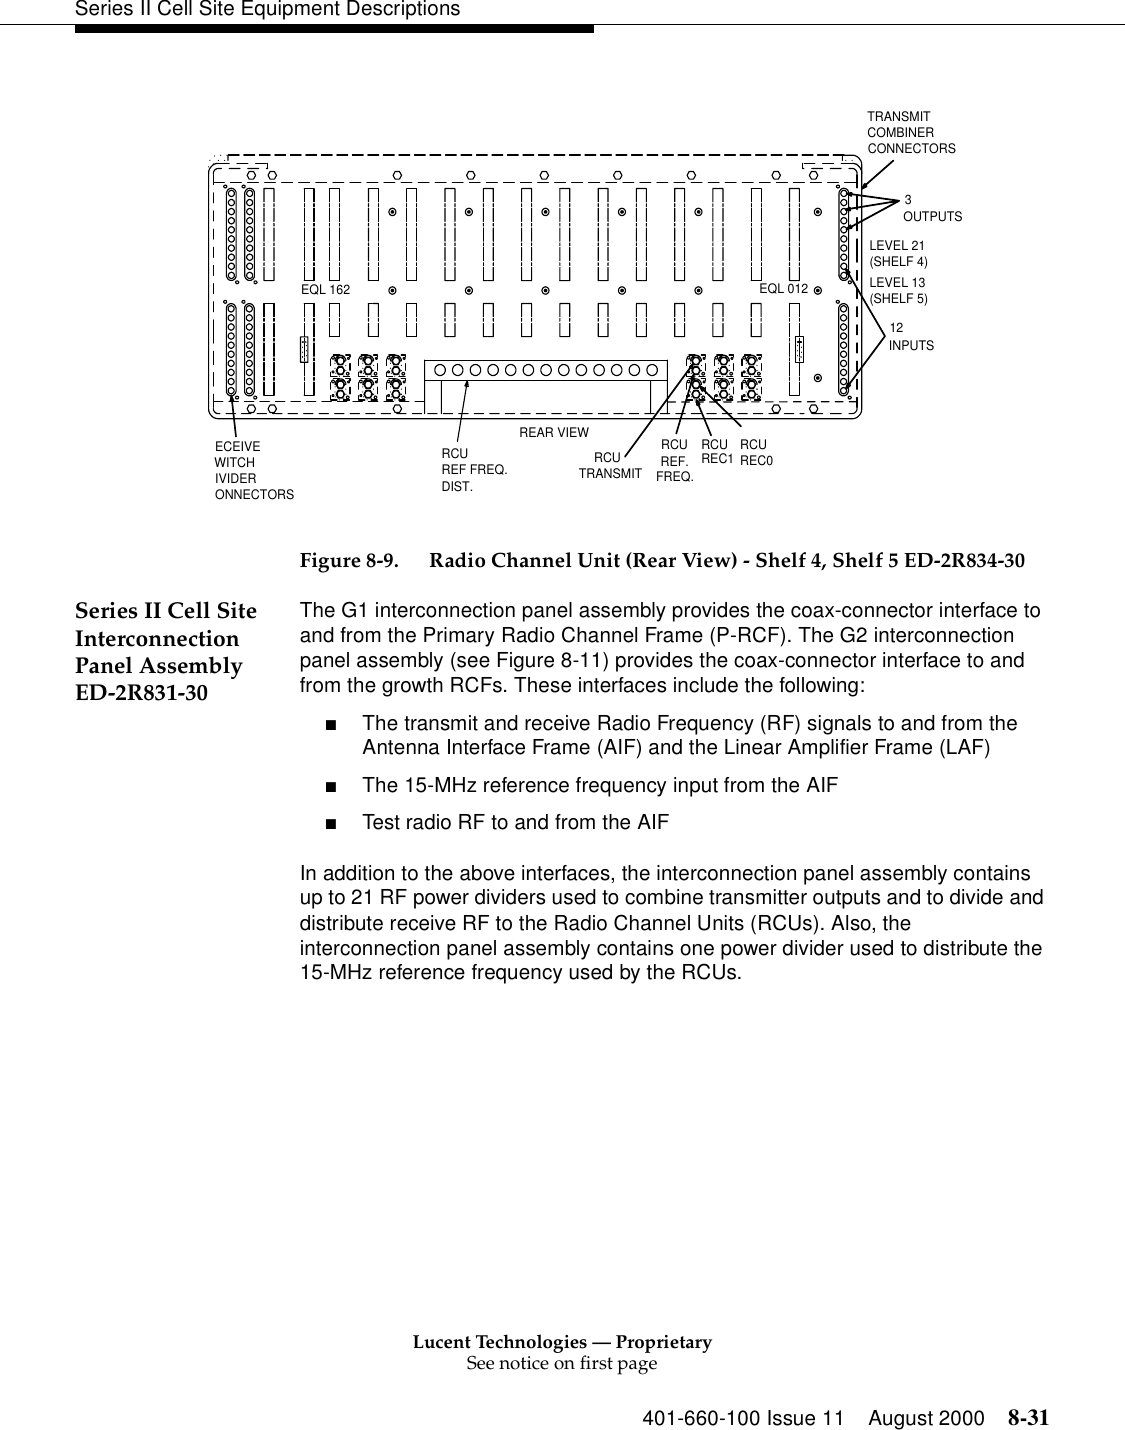 Lucent Technologies — ProprietarySee notice on first page401-660-100 Issue 11 August 2000 8-31Series II Cell Site Equipment Descriptions Figure 8-9. Radio Channel Unit (Rear View) - Shelf 4, Shelf 5 ED-2R834-30Series II Cell Site Interconnection Panel Assembly ED-2R831-30The G1 interconnection panel assembly provides the coax-connector interface to and from the Primary Radio Channel Frame (P-RCF). The G2 interconnection panel assembly (see Figure 8-11) provides the coax-connector interface to and from the growth RCFs. These interfaces include the following: ■The transmit and receive Radio Frequency (RF) signals to and from the Antenna Interface Frame (AIF) and the Linear Amplifier Frame (LAF) ■The 15-MHz reference frequency input from the AIF ■Test radio RF to and from the AIF In addition to the above interfaces, the interconnection panel assembly contains up to 21 RF power dividers used to combine transmitter outputs and to divide and distribute receive RF to the Radio Channel Units (RCUs). Also, the interconnection panel assembly contains one power divider used to distribute the 15-MHz reference frequency used by the RCUs.ONNECTORSWITCHECEIVEIVIDEREQL 162DIST.RCU RCUREF FREQ.REAR VIEW(SHELF 4)LEVEL 21(SHELF 5)LEVEL 133OUTPUTSCONNECTORSCOMBINERTRANSMITINPUTS12EQL 012REC0RCUREC1RCUFREQ.REF.RCUTRANSMIT